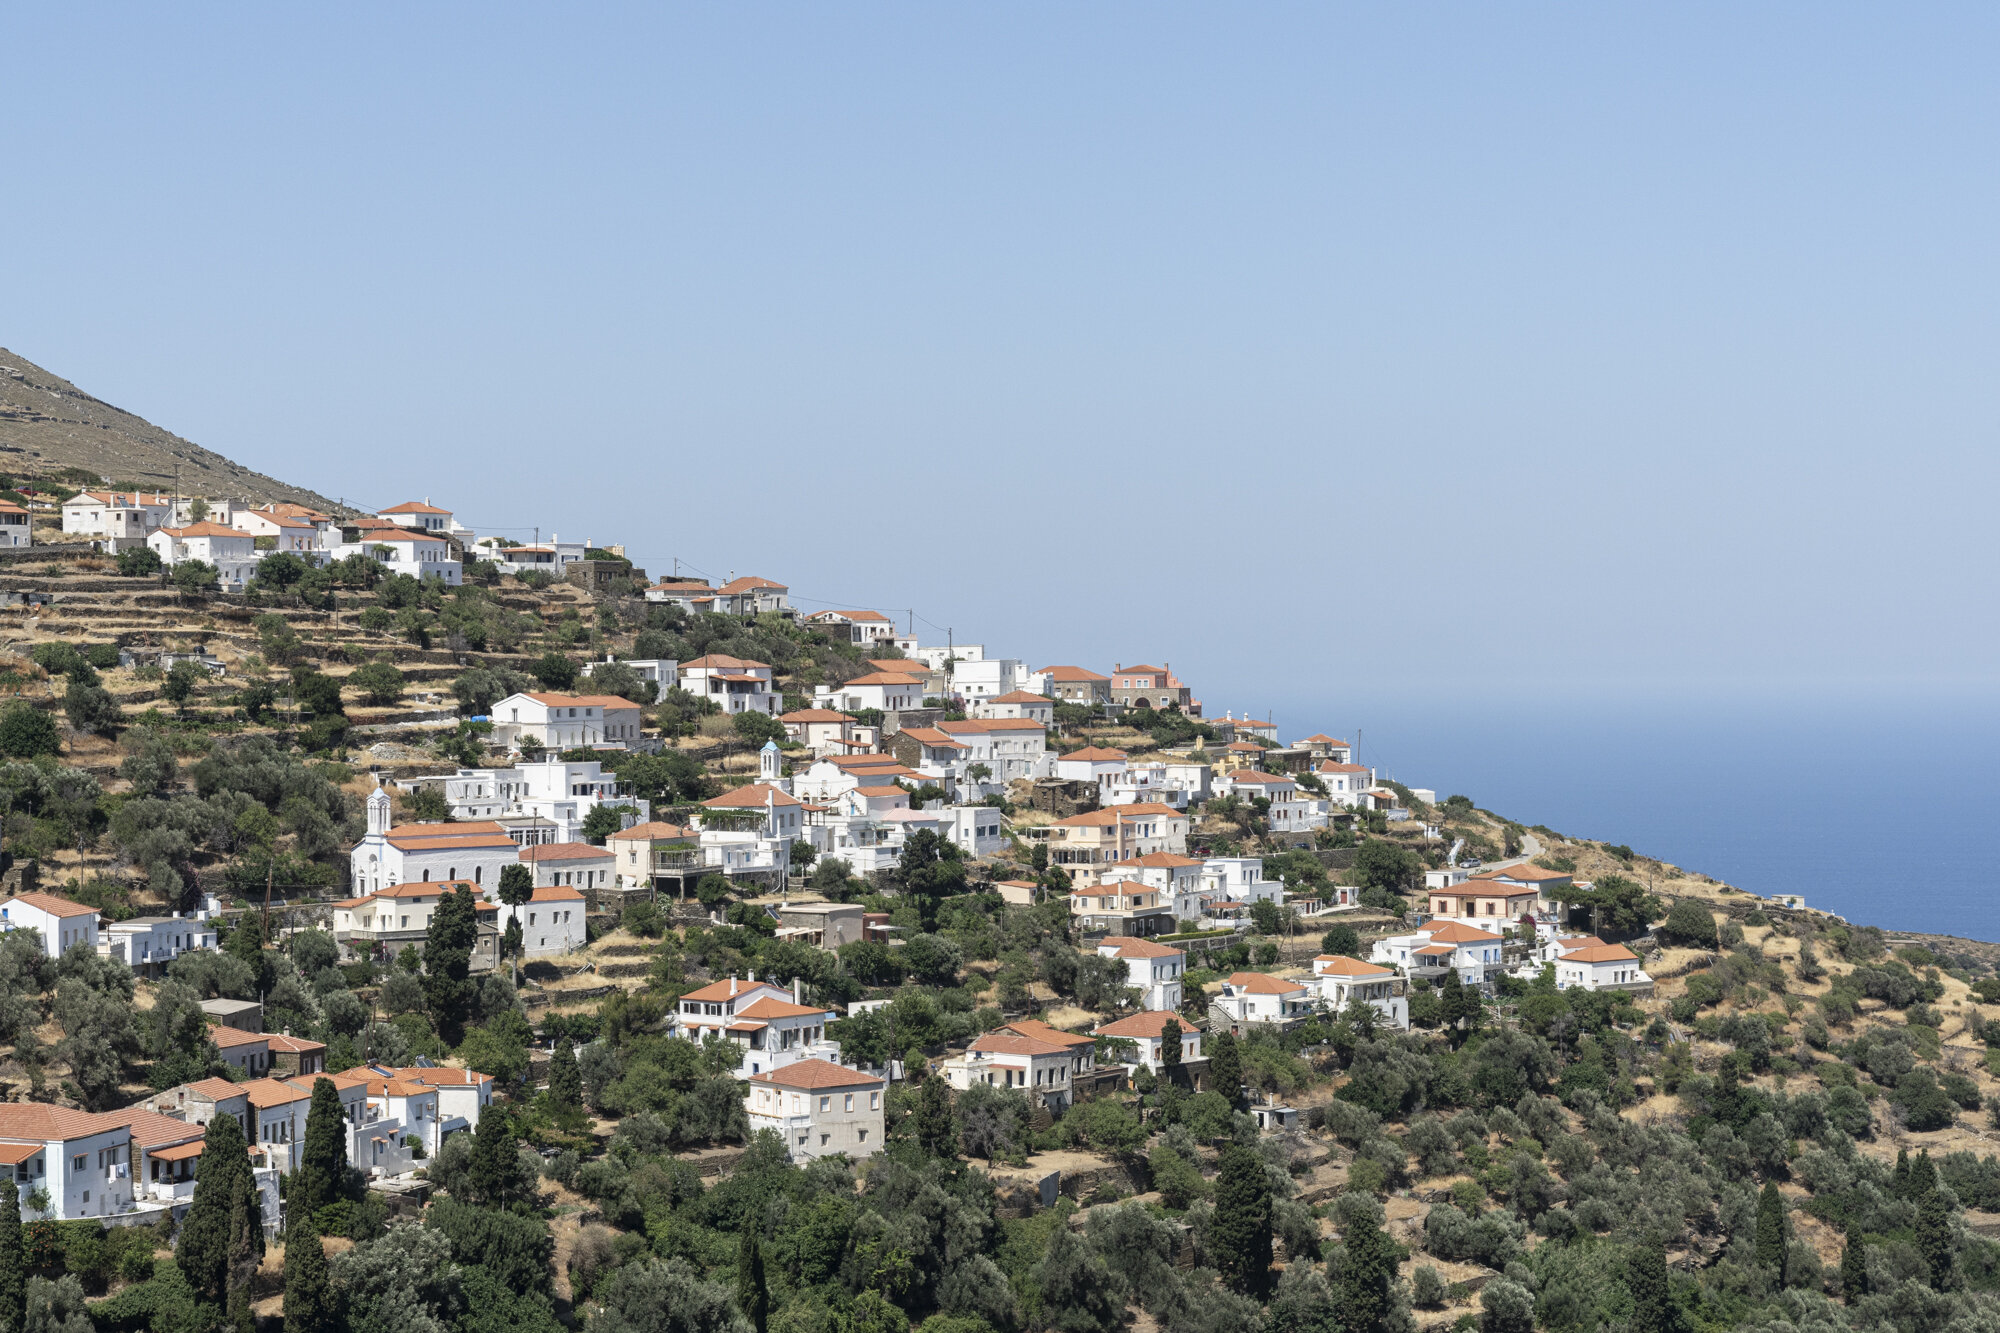 Andros island in Greece. Accommodation. Beaches. Villages. Ferries.